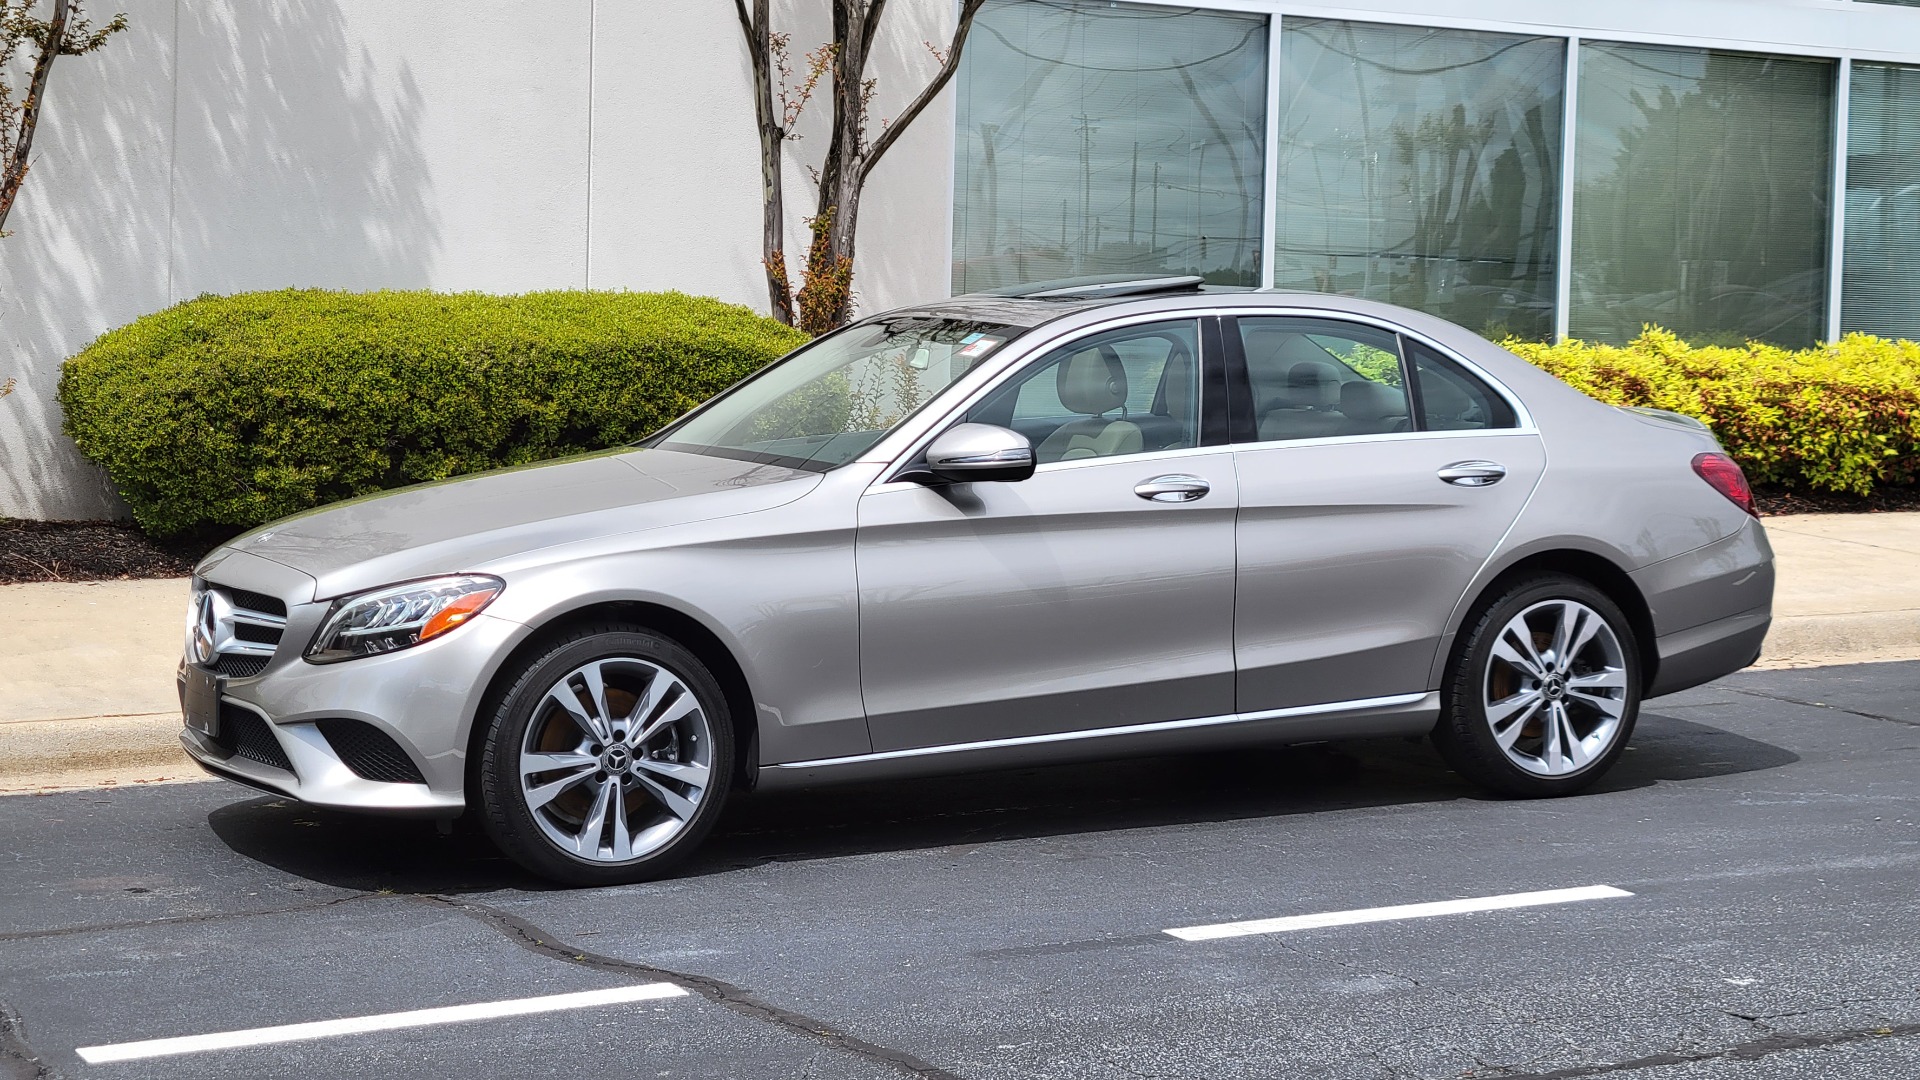 Used 2019 Mercedes-Benz C-CLASS C 300 PREMIUM 4MATIC / BURMESTER / KEYLESS-GO / REARVIEW for sale $37,395 at Formula Imports in Charlotte NC 28227 1